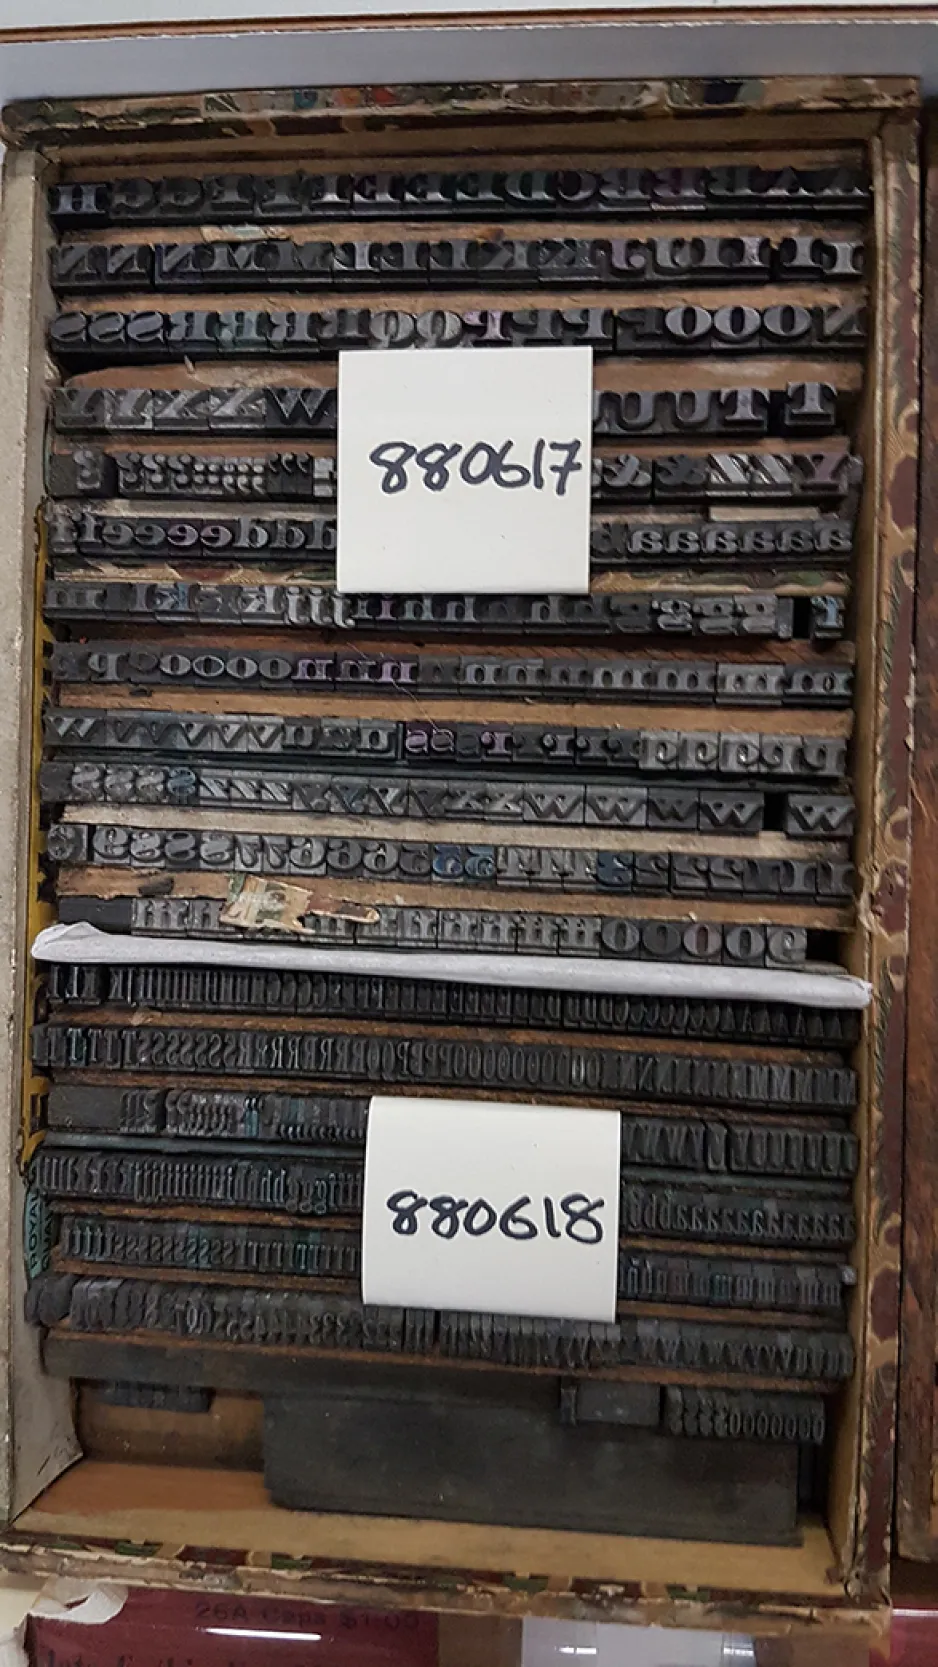 Two artifacts housed in a wooden box. They are made up of foundry type that are organized alphabetically right to left. The first artifact is labeled with a white tag with black writing that says “880617.” It is a 16-point display typeface with serifs on the characters. The second artifact is labeled with a white tag with black writing that says “880618.” It is a 16-point condensed typeface with serifs.